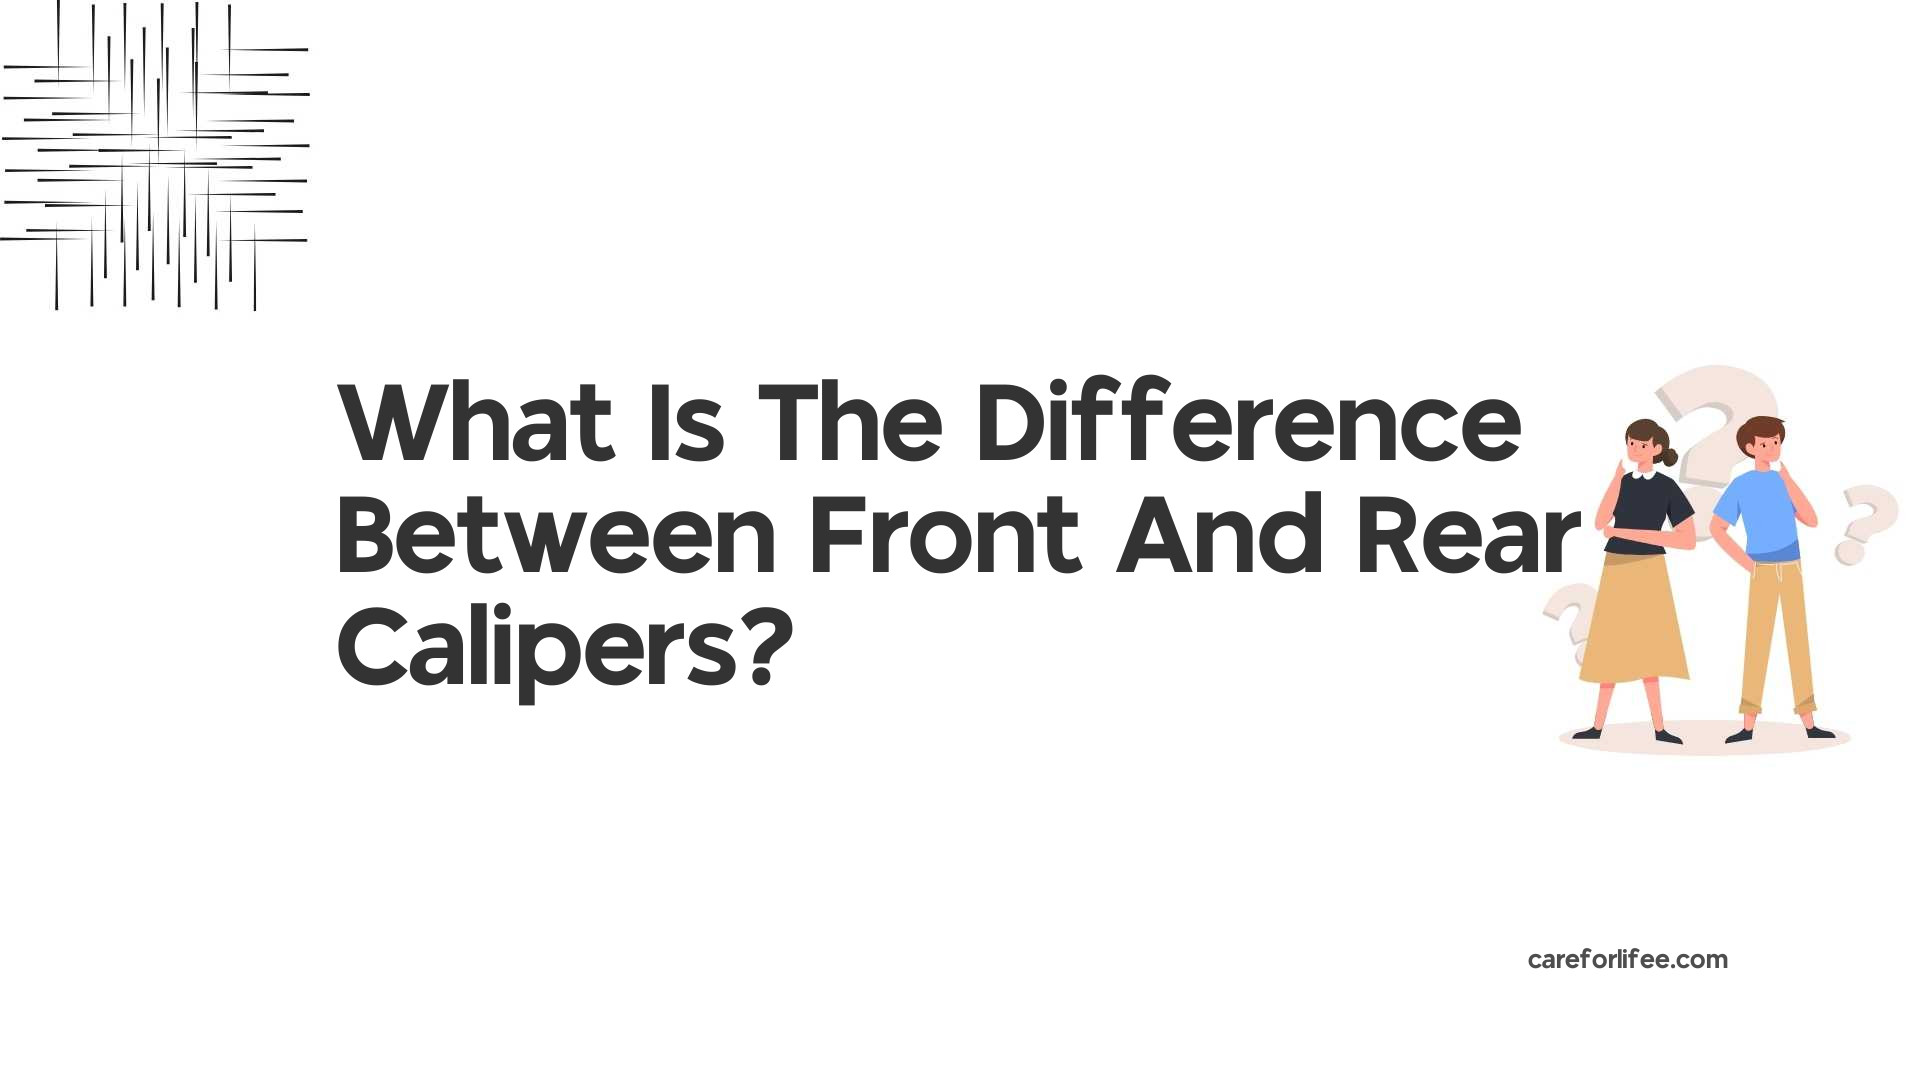 What Is The Difference Between Front And Rear Calipers?